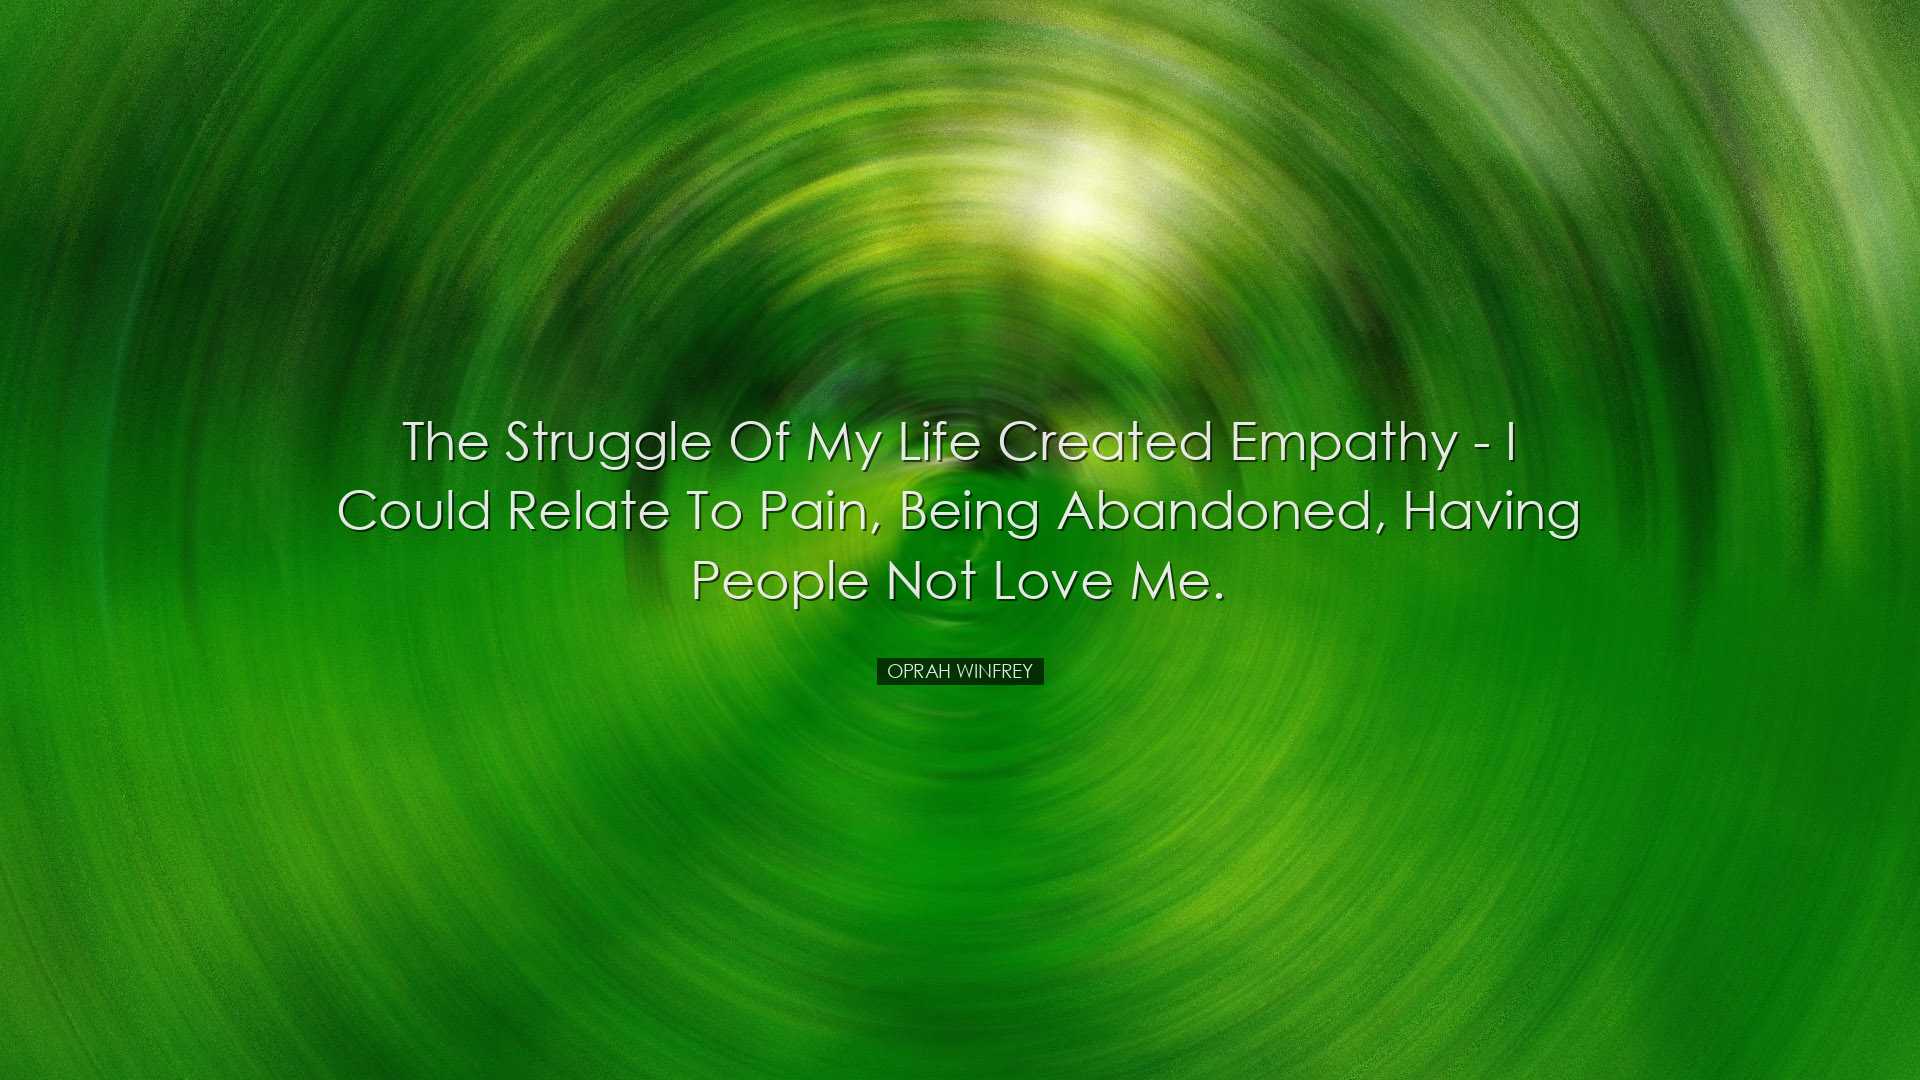 The struggle of my life created empathy - I could relate to pain,